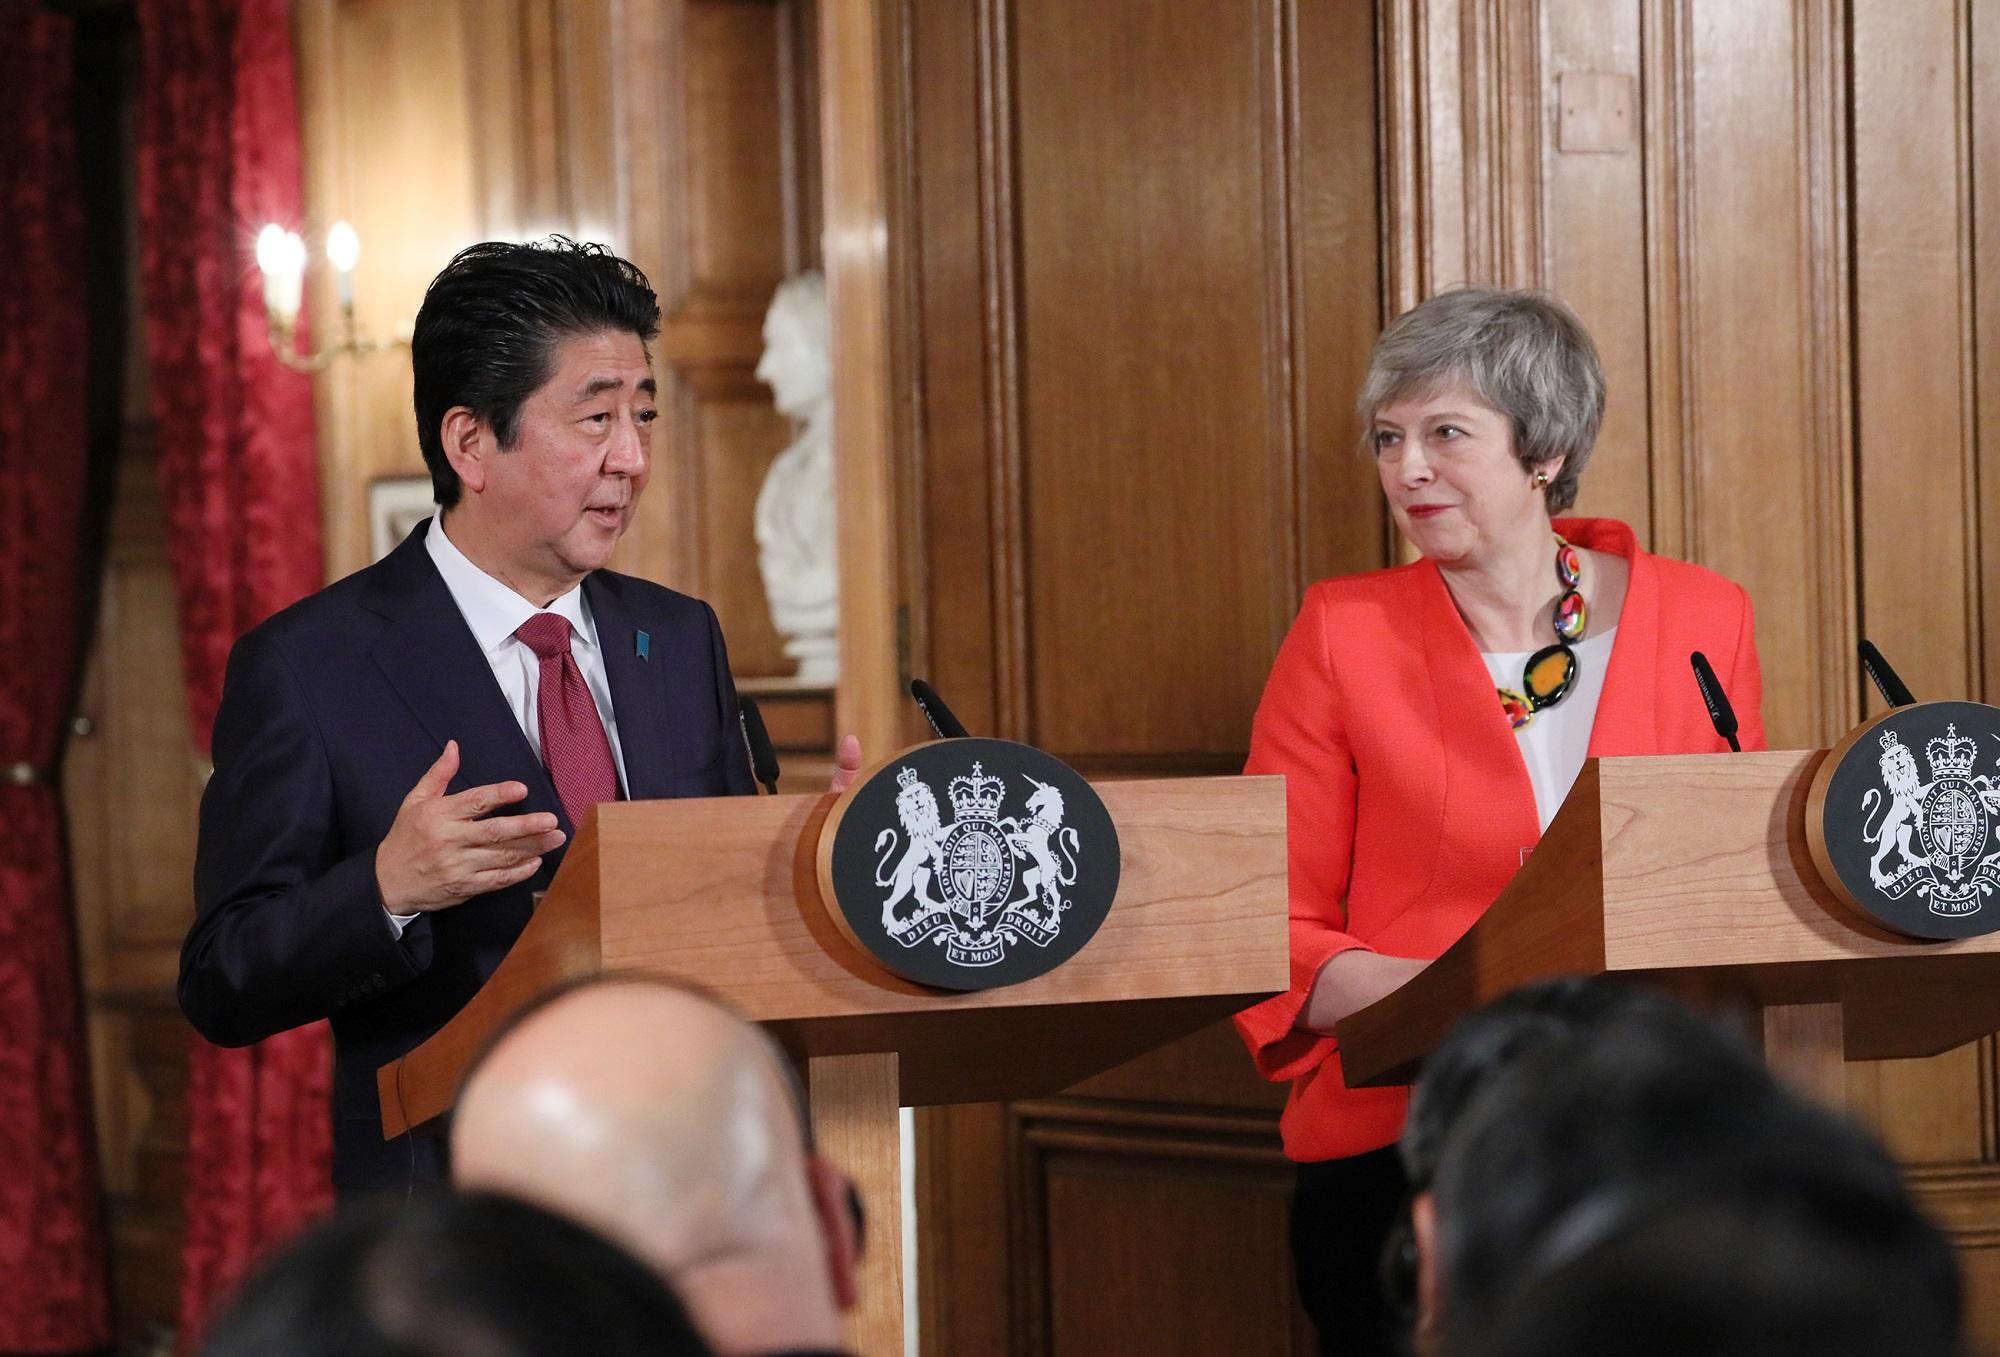 Photograph of the Japan-UK joint press conference